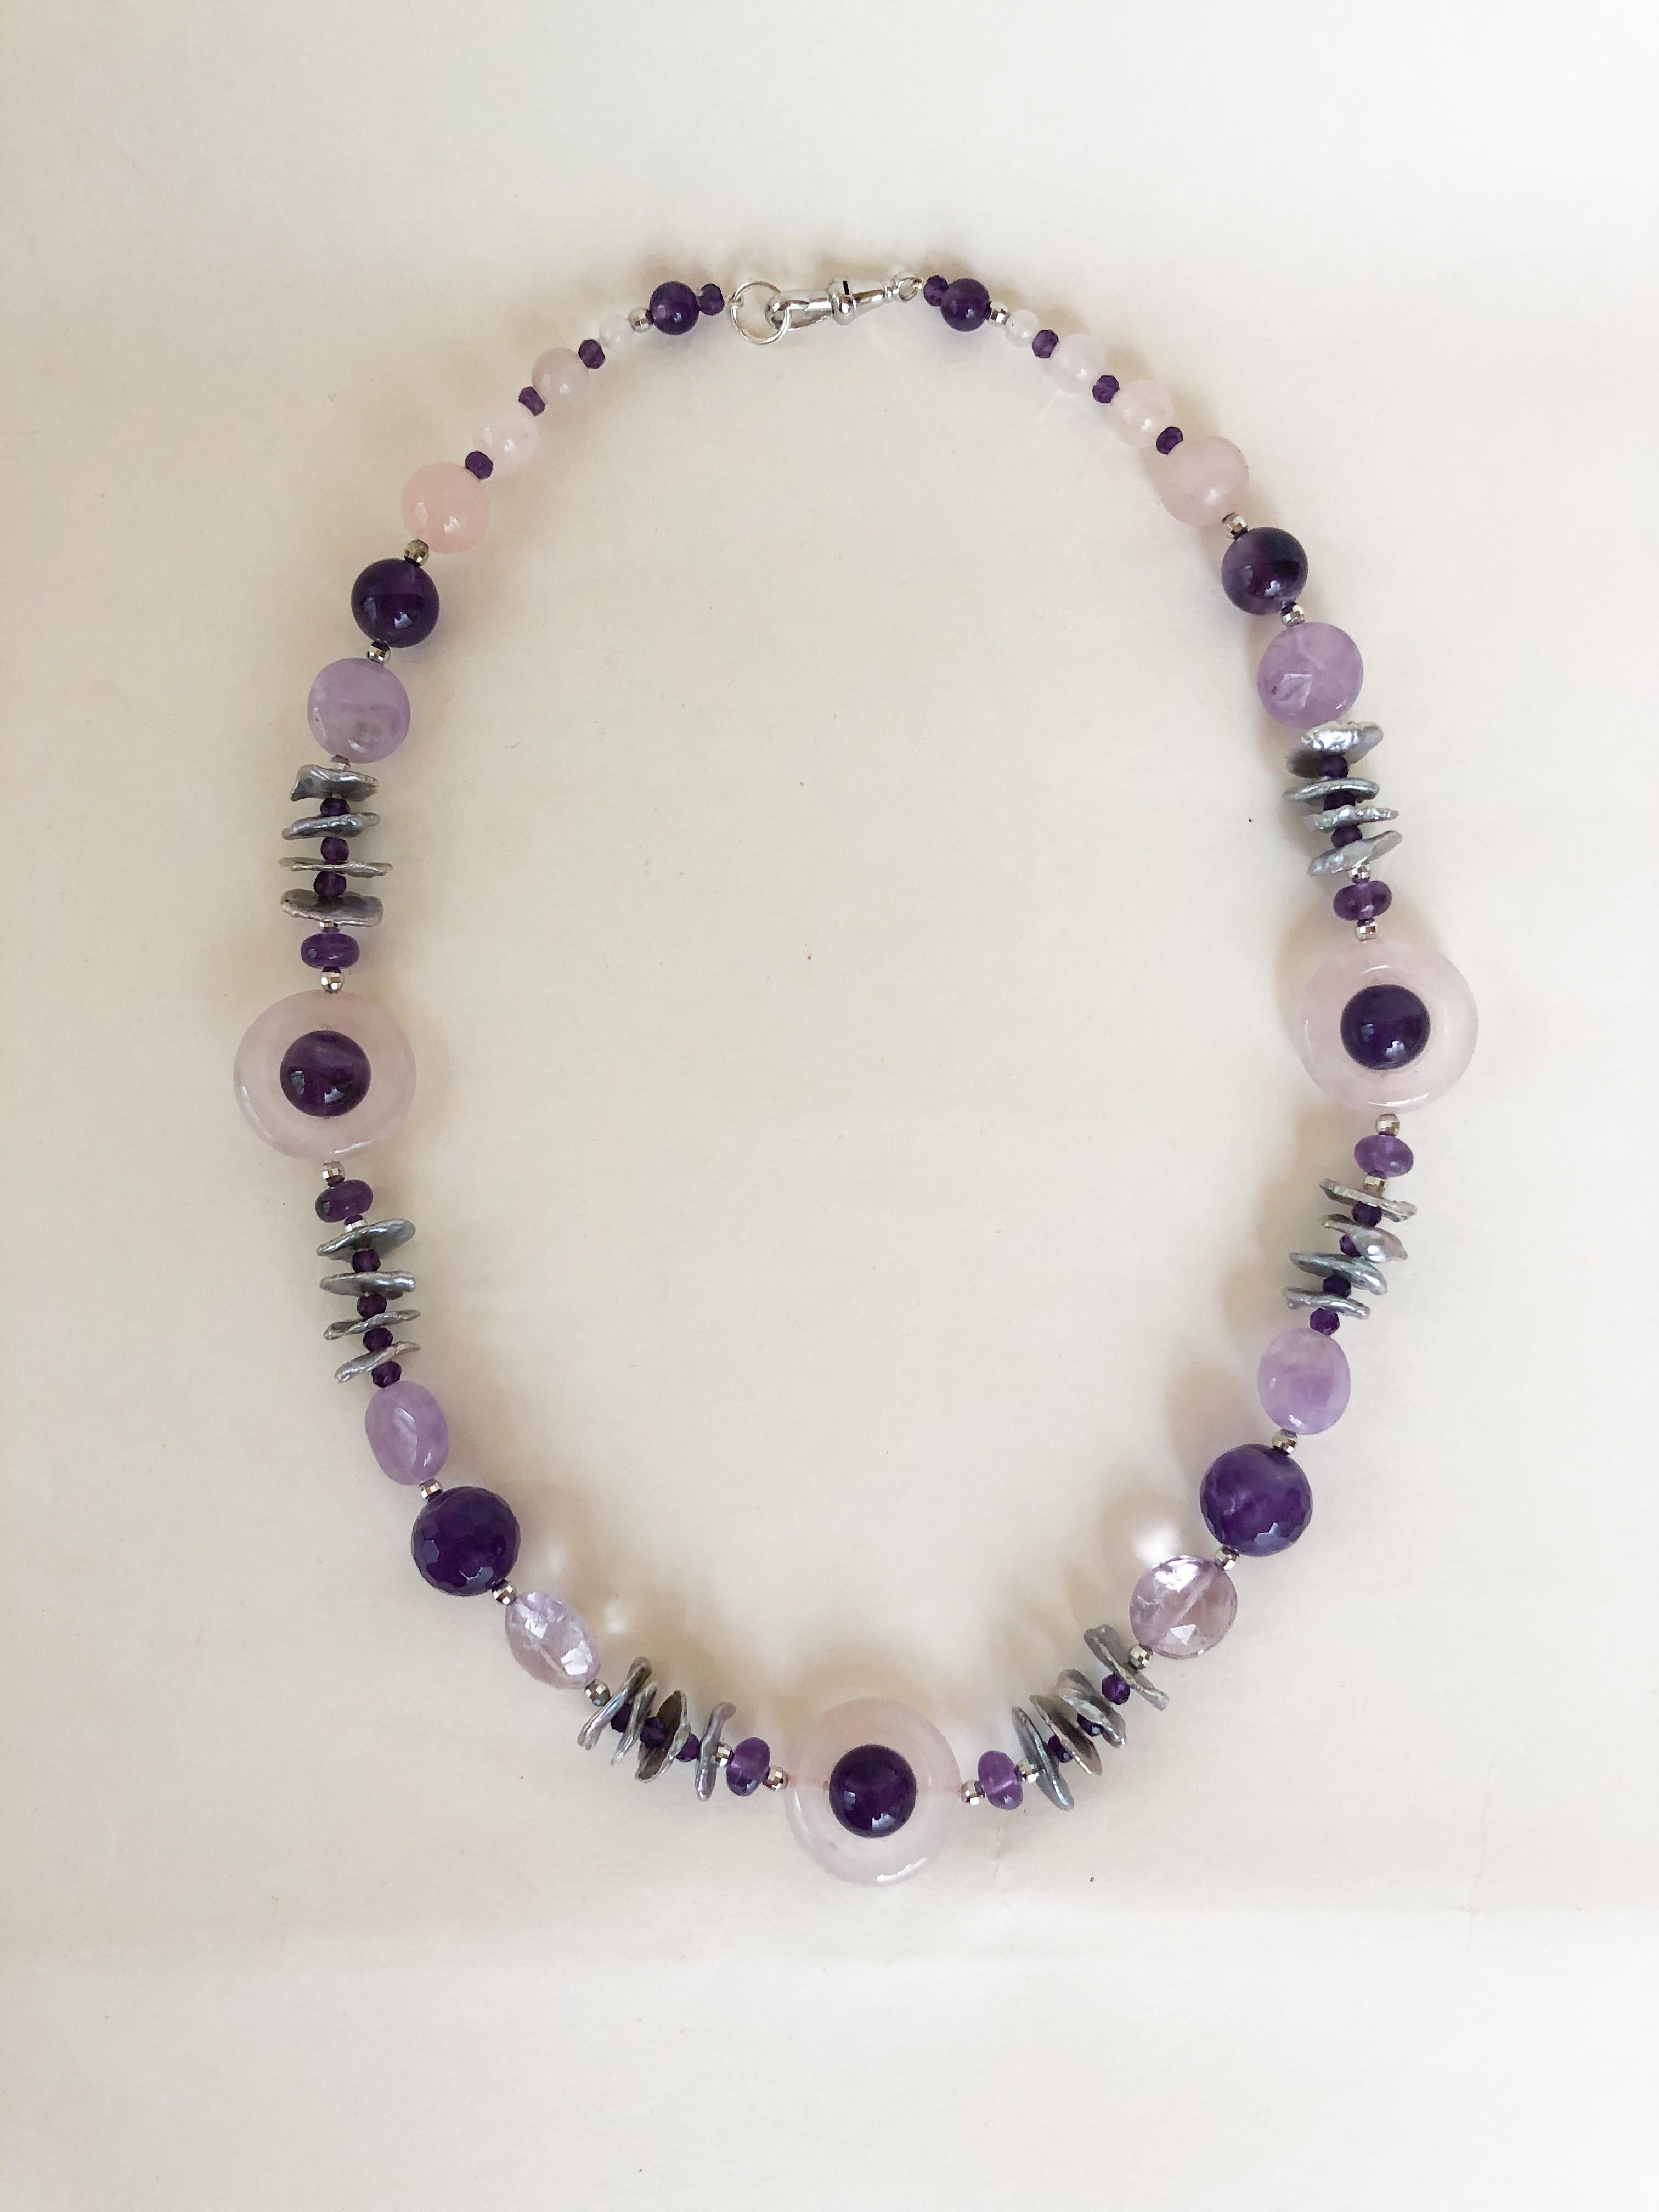 Artisan Marina J. Amethyst, Rose Quartz and Grey Pearl Necklace with Silver Clasp